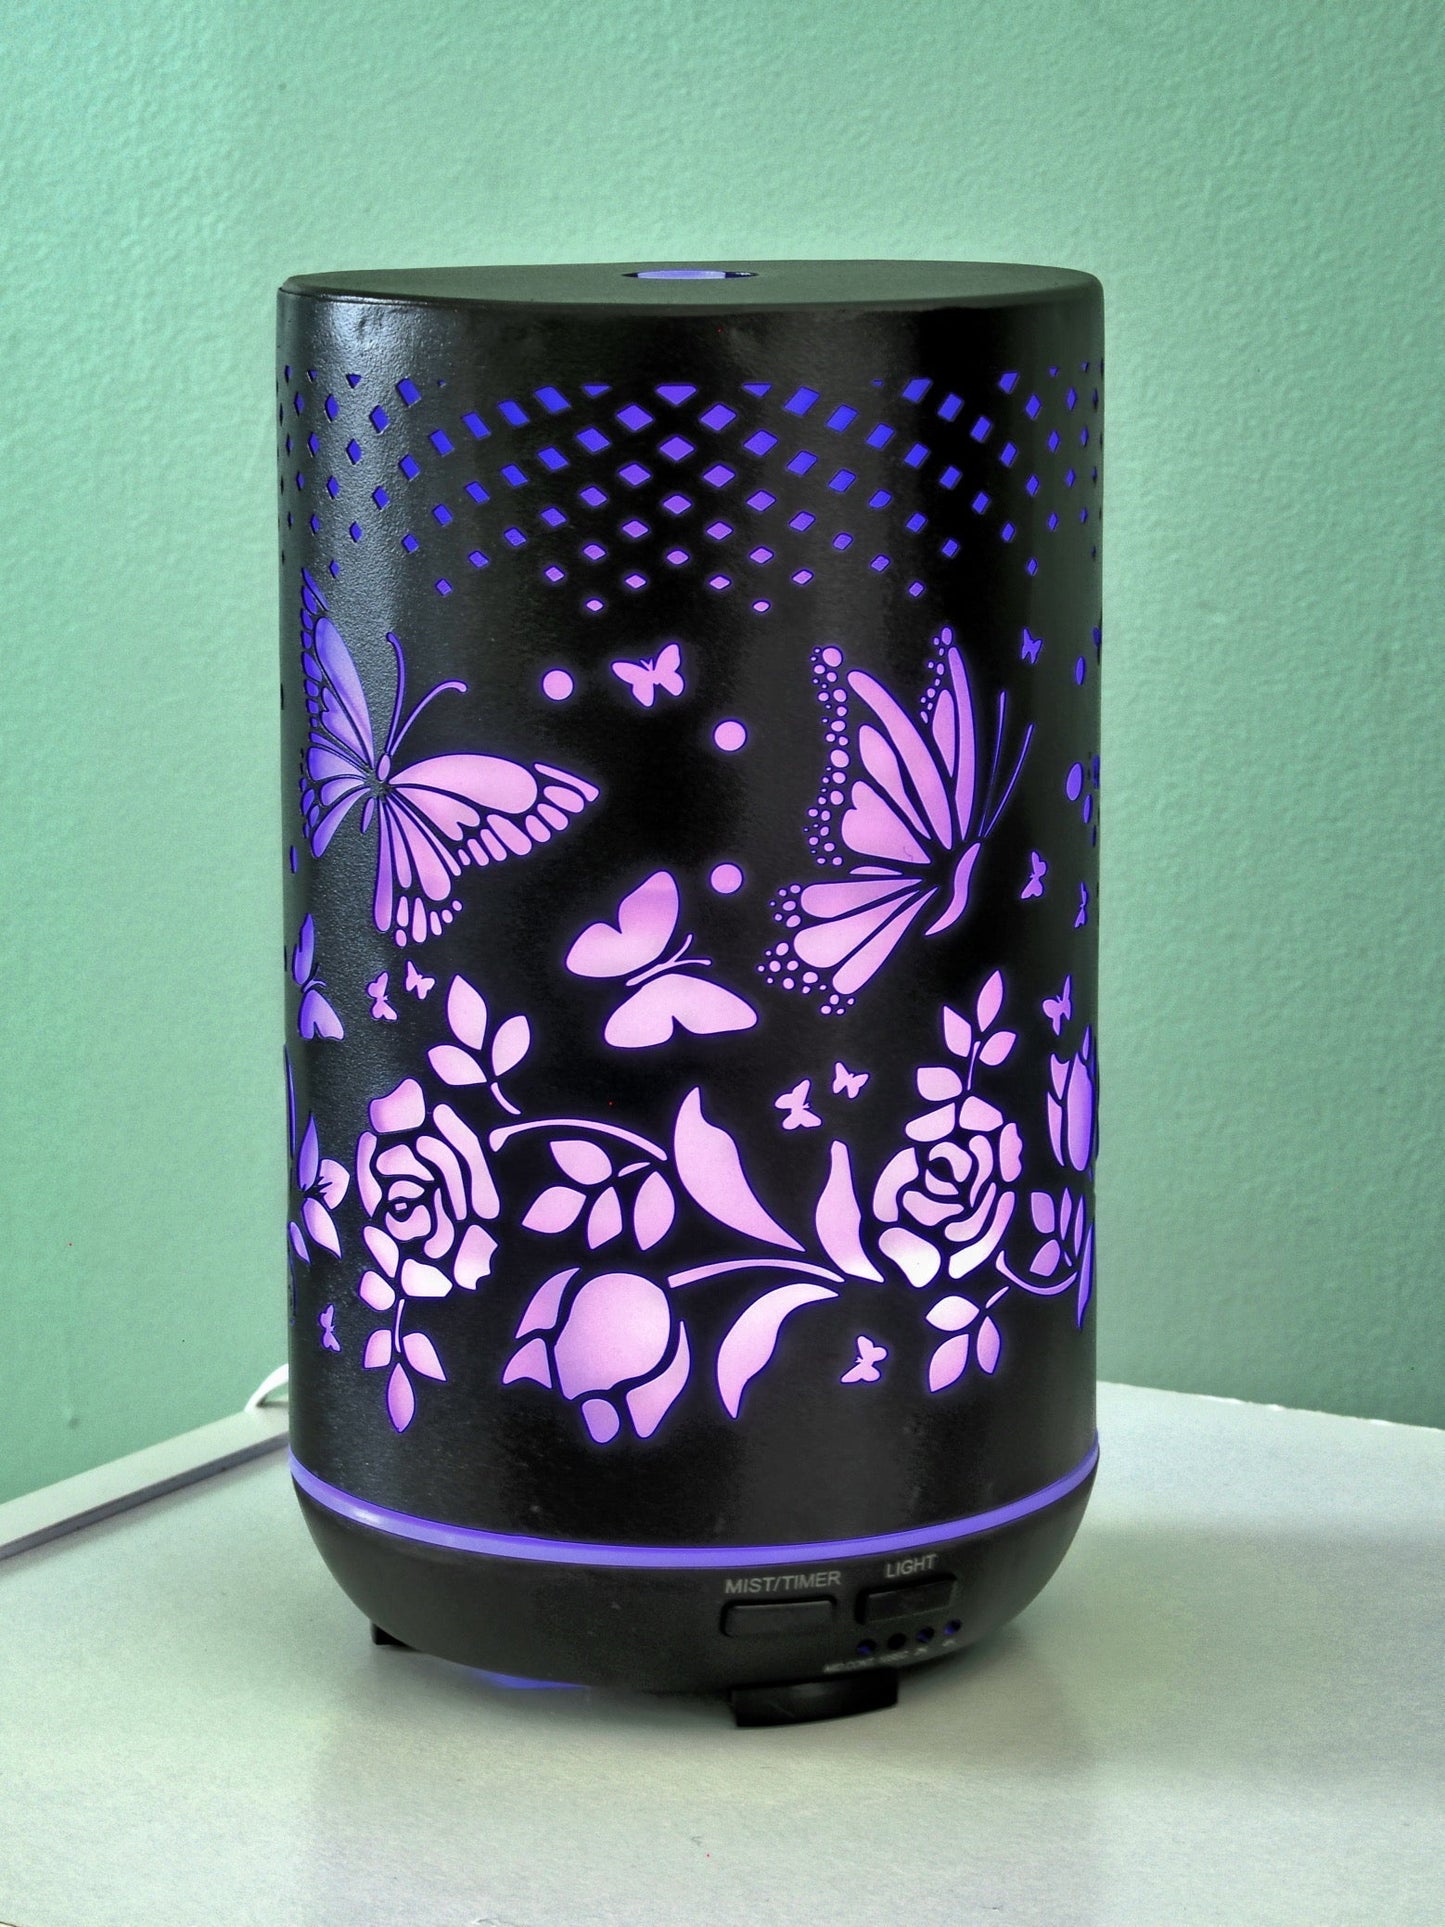 Wellness Essential Oil Diffuser - Elegant Butterflies and Roses Design by Ancient Infusions.